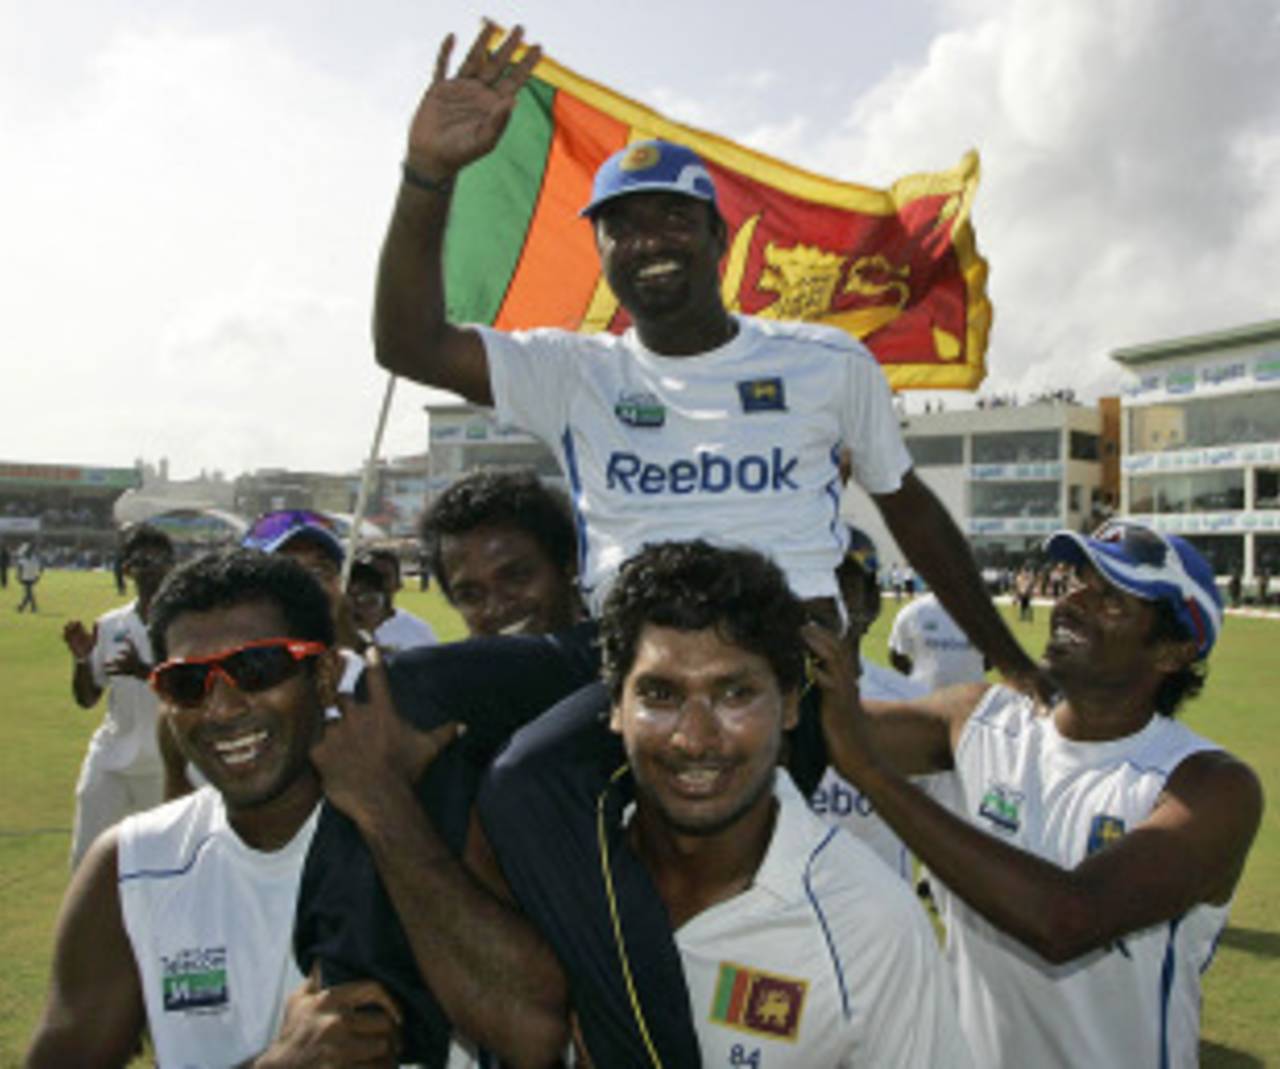 Muttiah Muralitharan: "I have nothing more to achieve and I thought this is the right time [to retire]"&nbsp;&nbsp;&bull;&nbsp;&nbsp;Associated Press